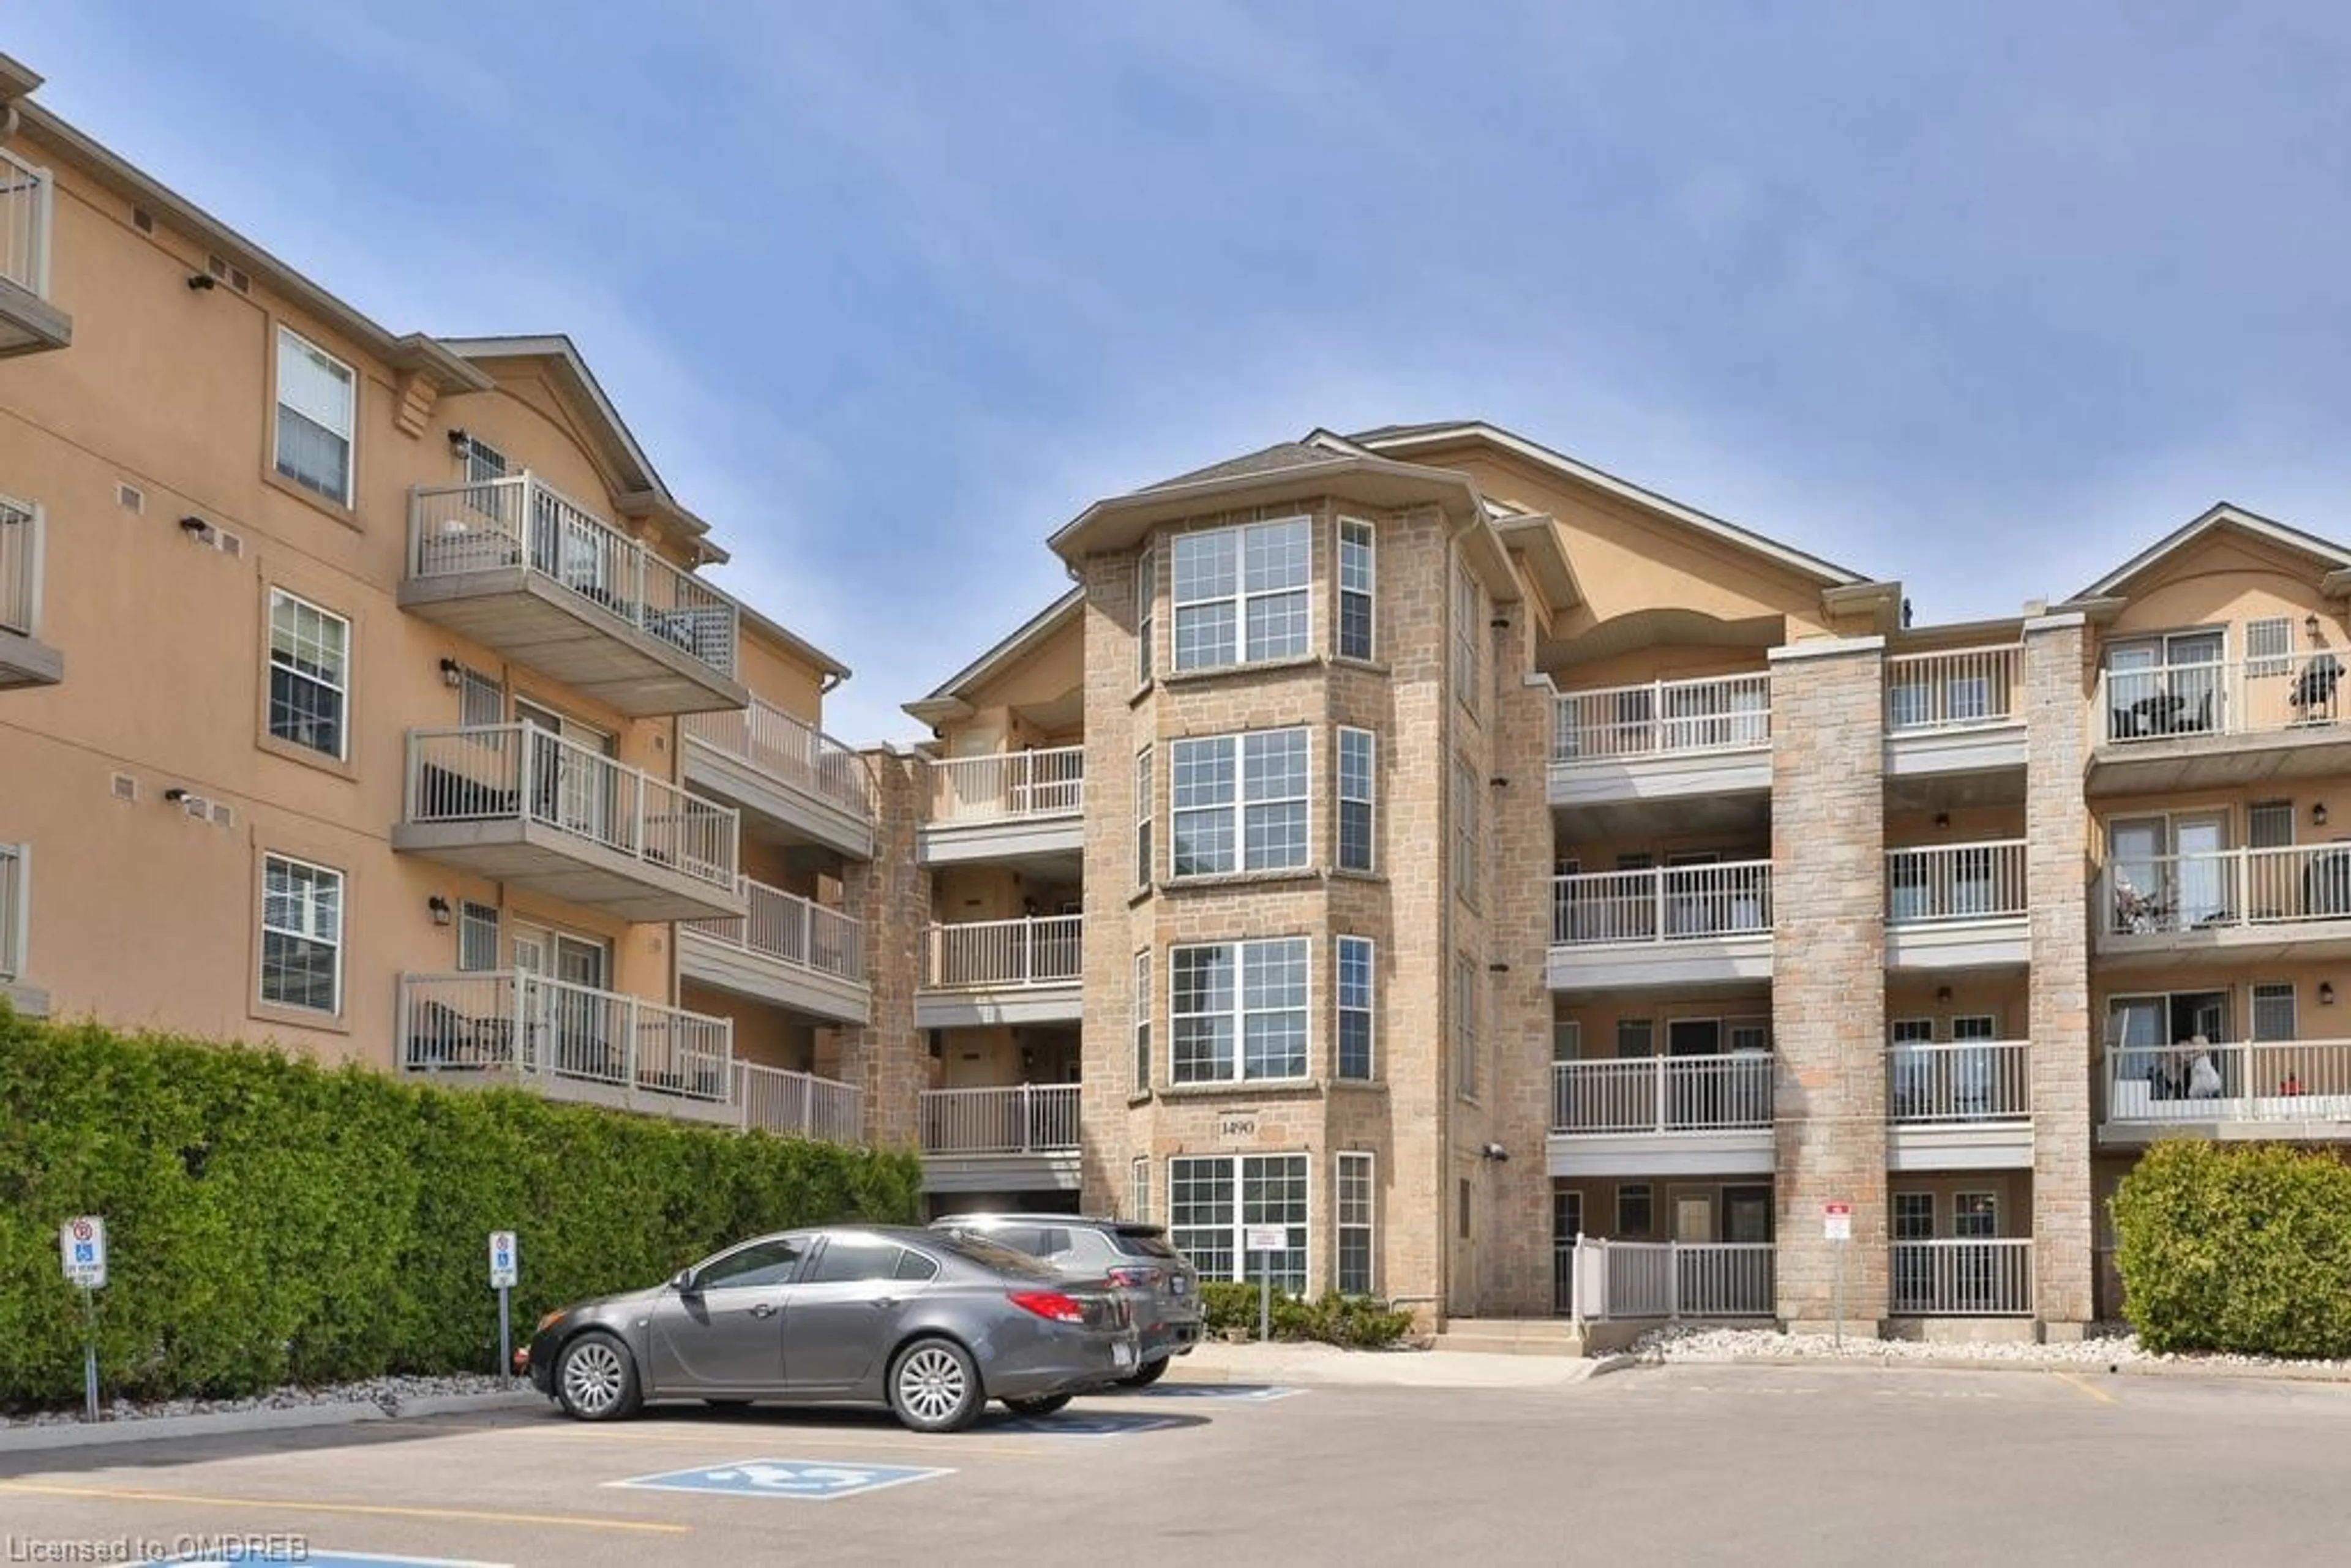 A pic from exterior of the house or condo for 1490 Bishops Gate #411, Oakville Ontario L6M 4N4